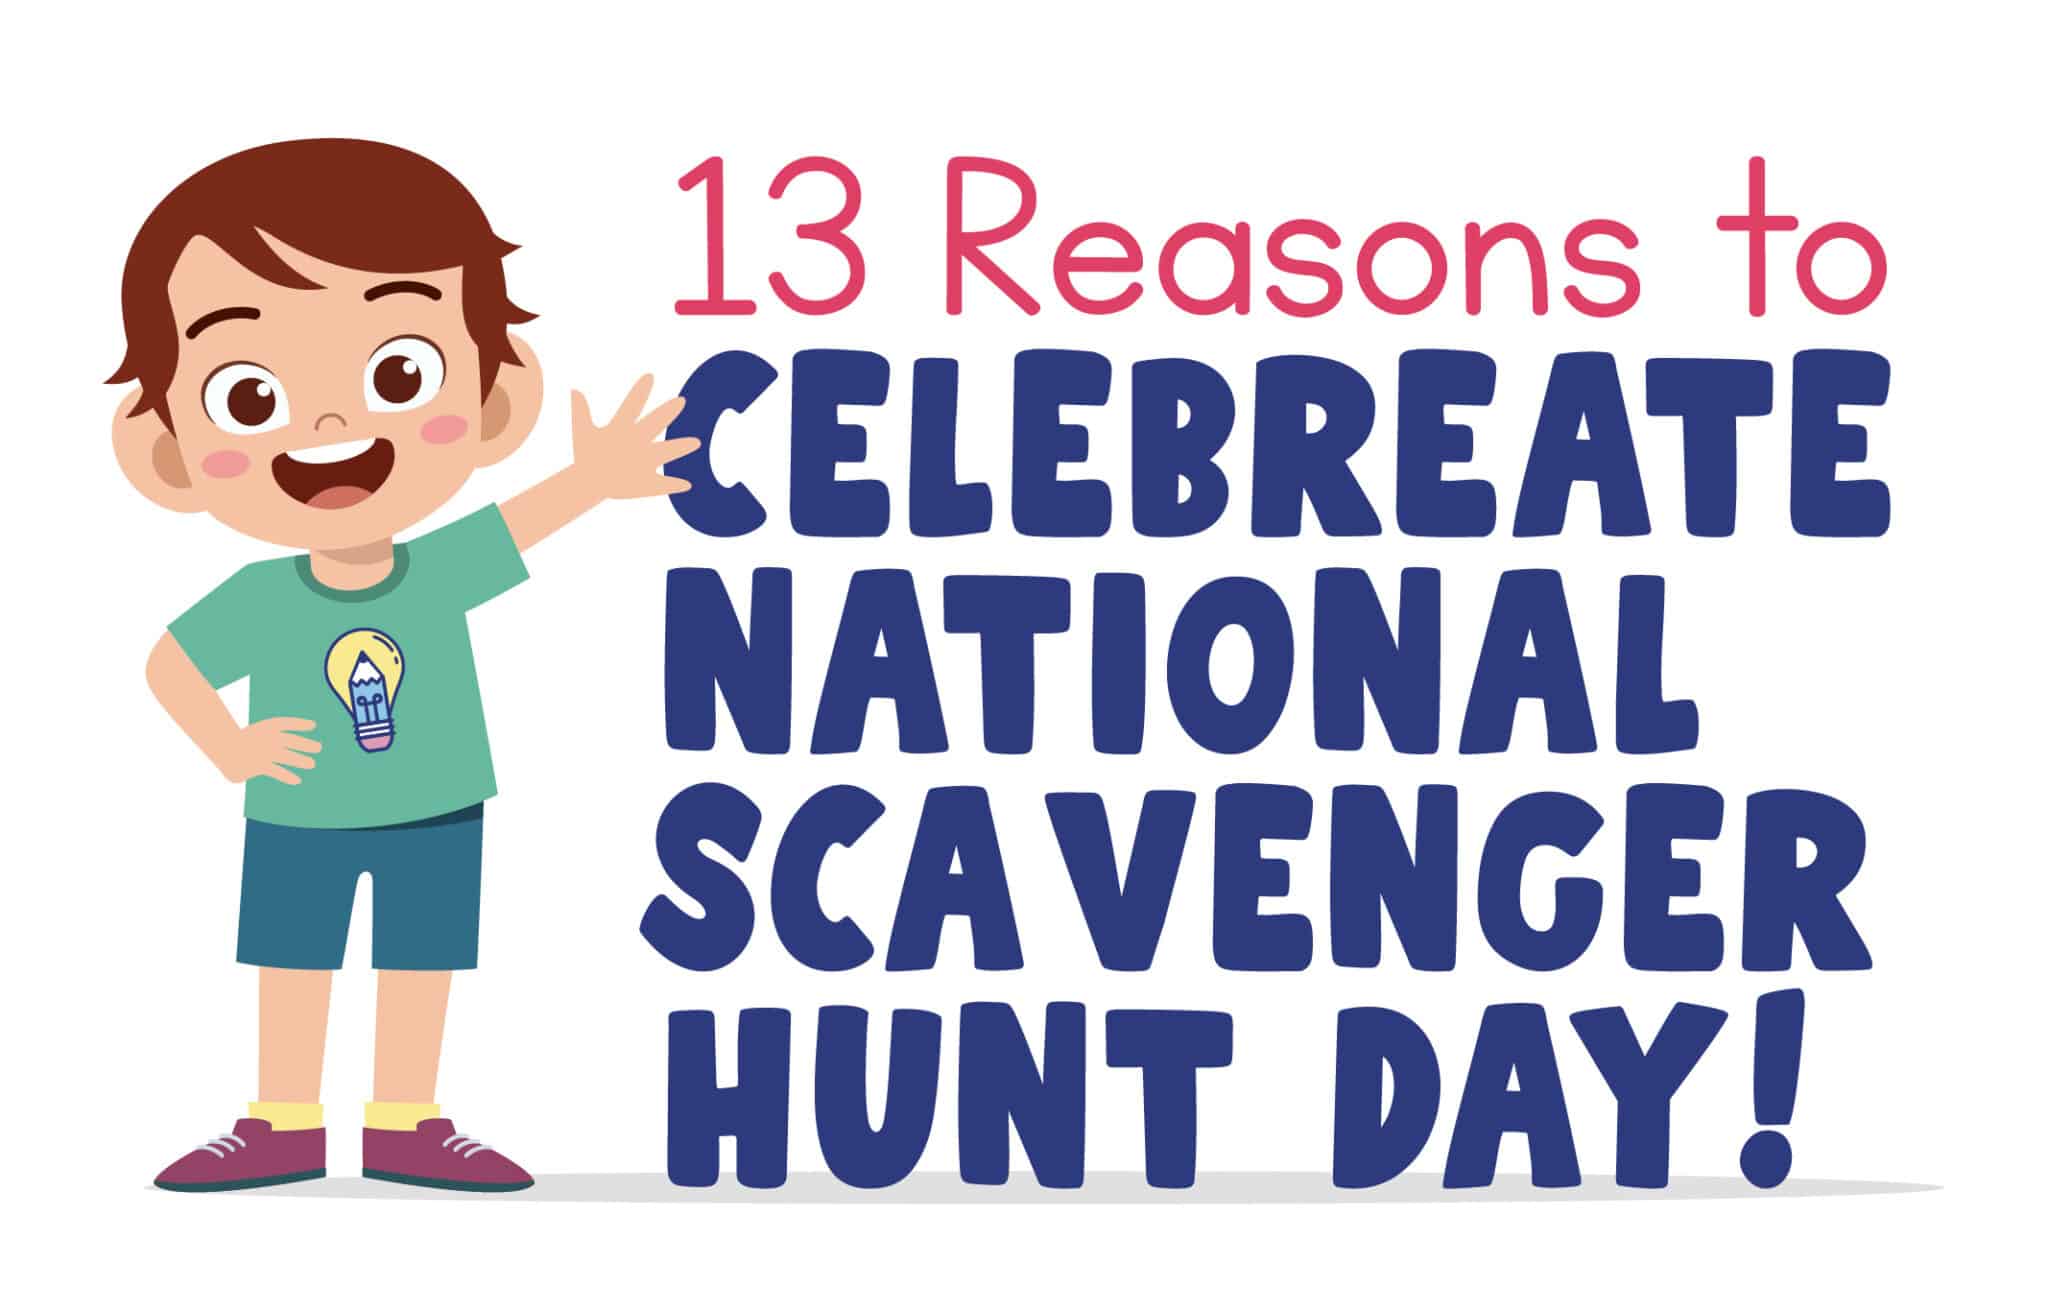 13 Reasons to Celebrate National Scavenger Hunt Day with Kids